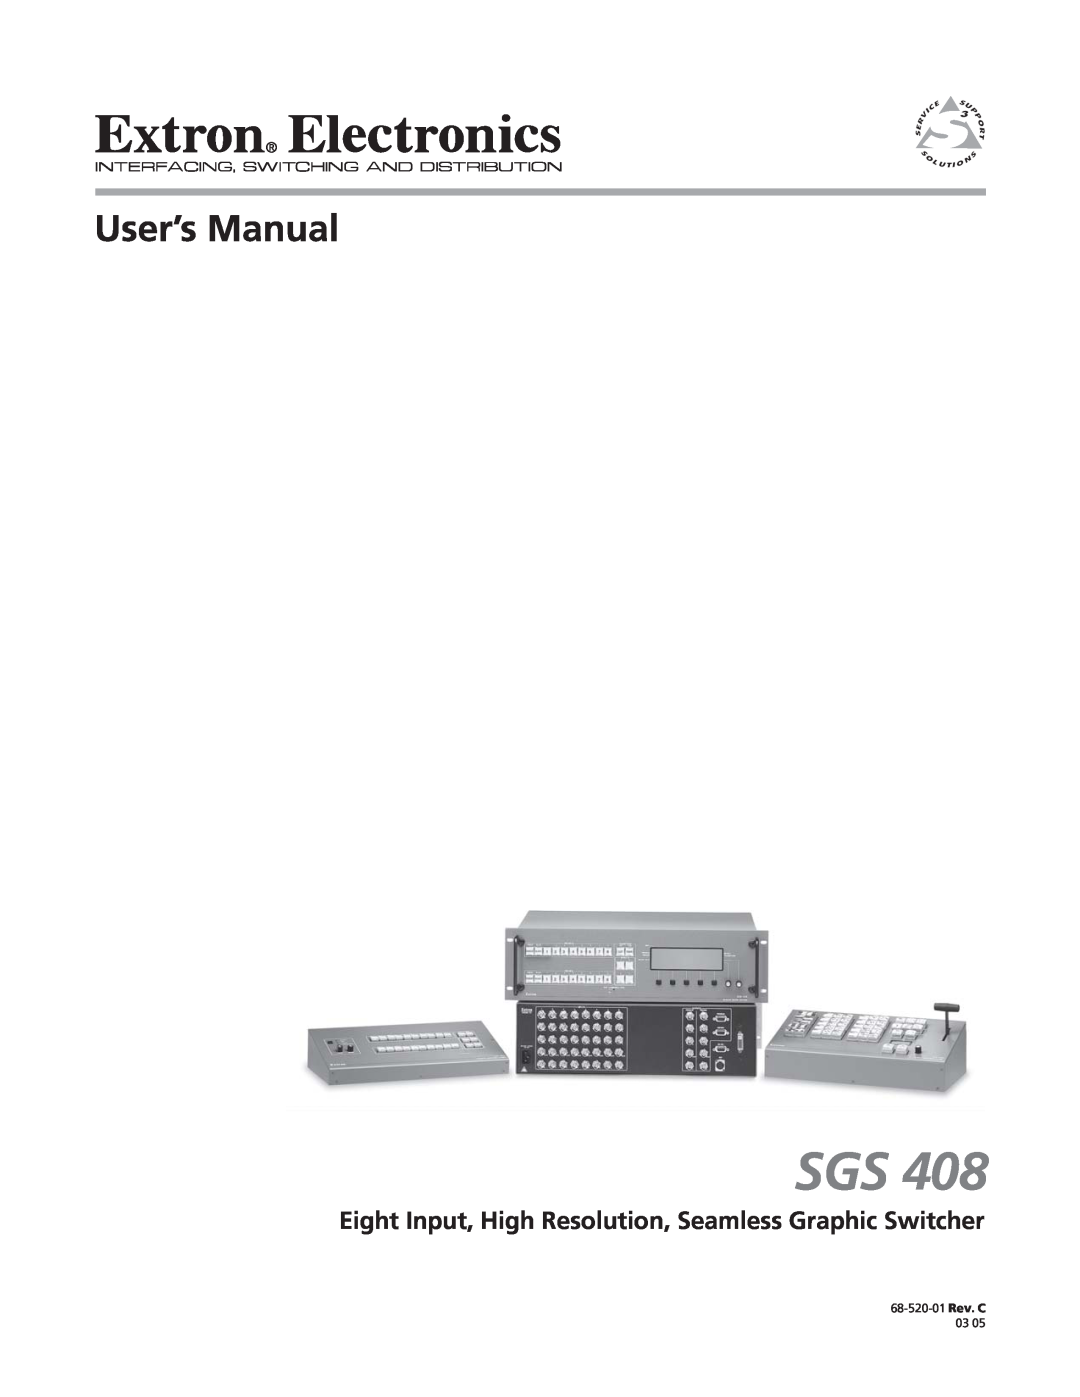 Extron electronic SGS 408 manual Eight Input, High Resolution, Seamless Graphic Switcher, 68-520-01 Rev. C 